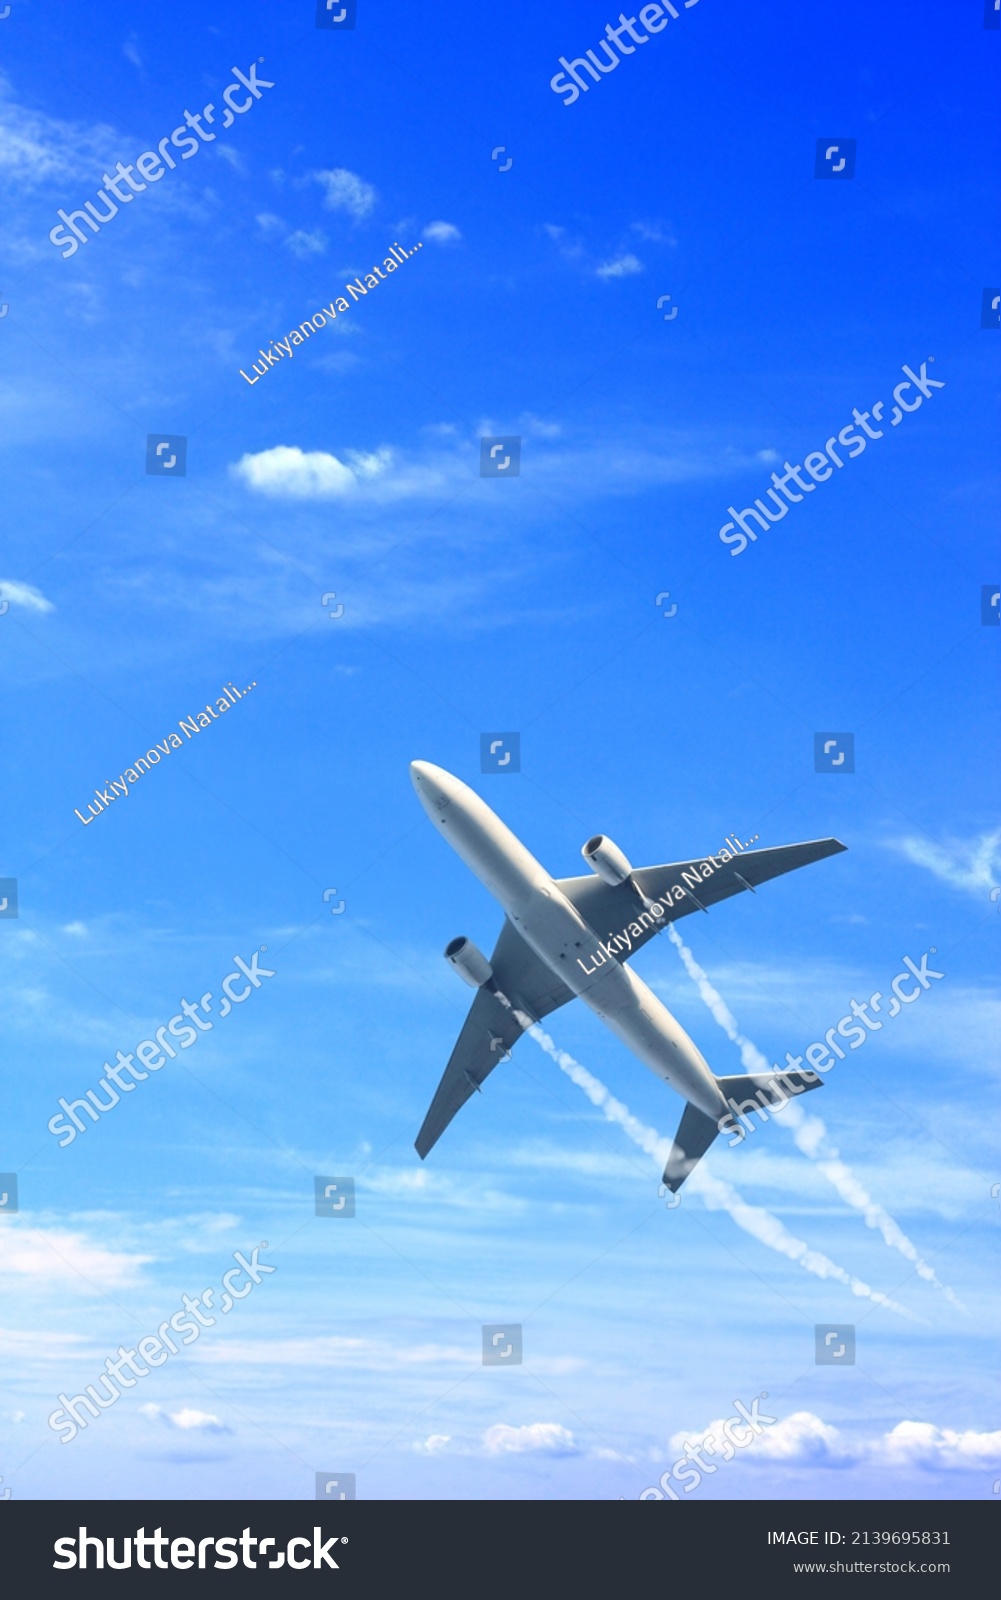 Vertical nature background with aircraft and Jet trailing smoke in the sky. Airplane and condensation trail. Foggy trail jet and plane in blue sky with white clouds. Traveling the world concept #2139695831